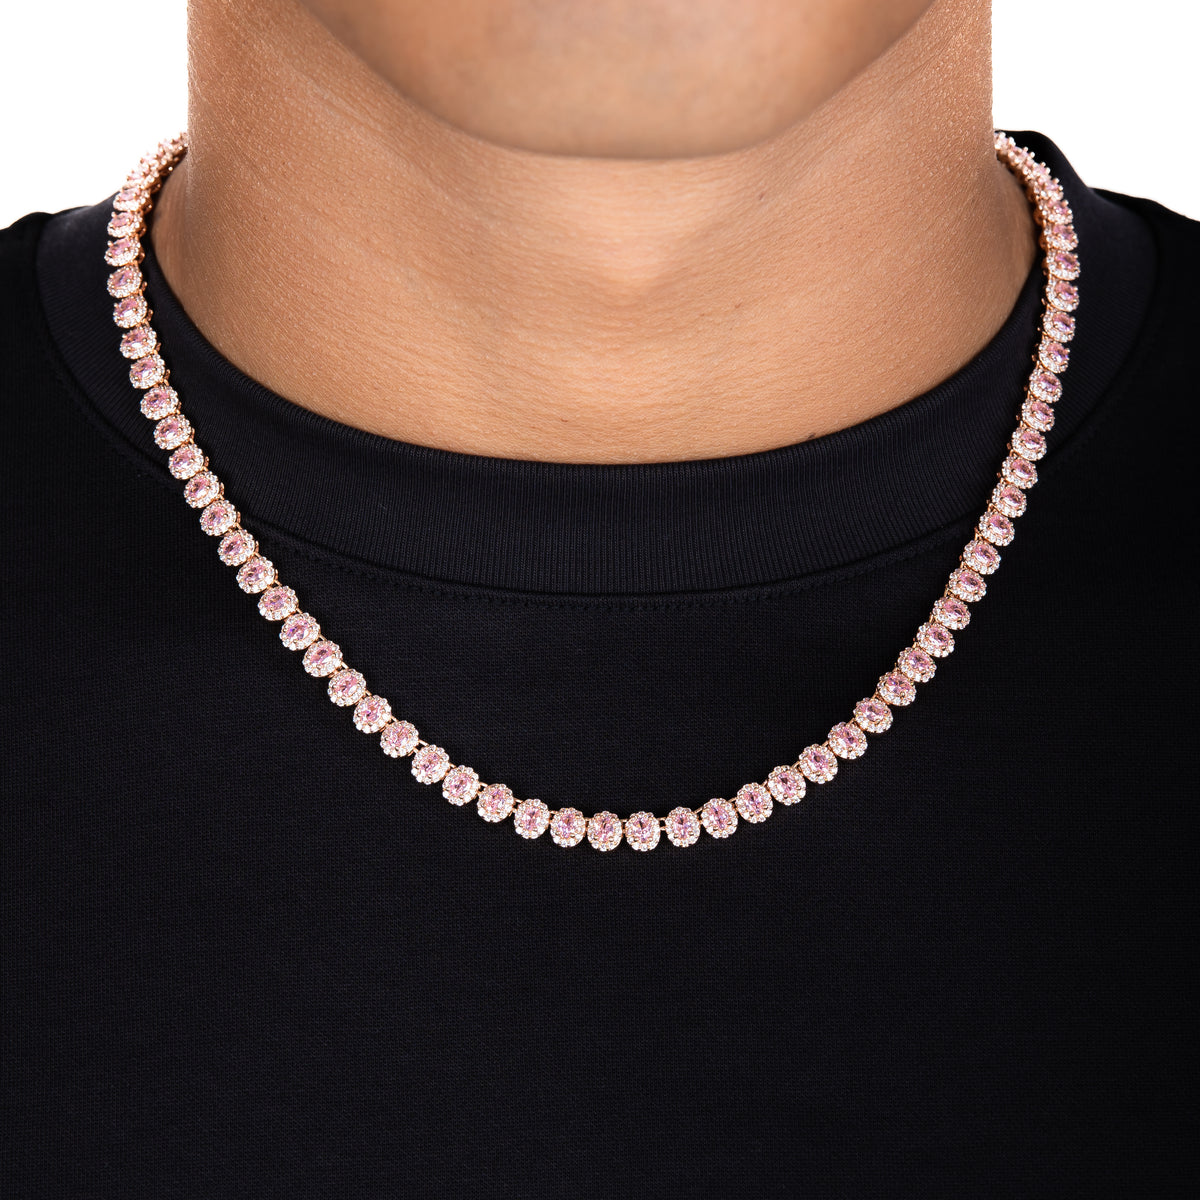 7mm Oval Tennis Chain w/ Pink Stones